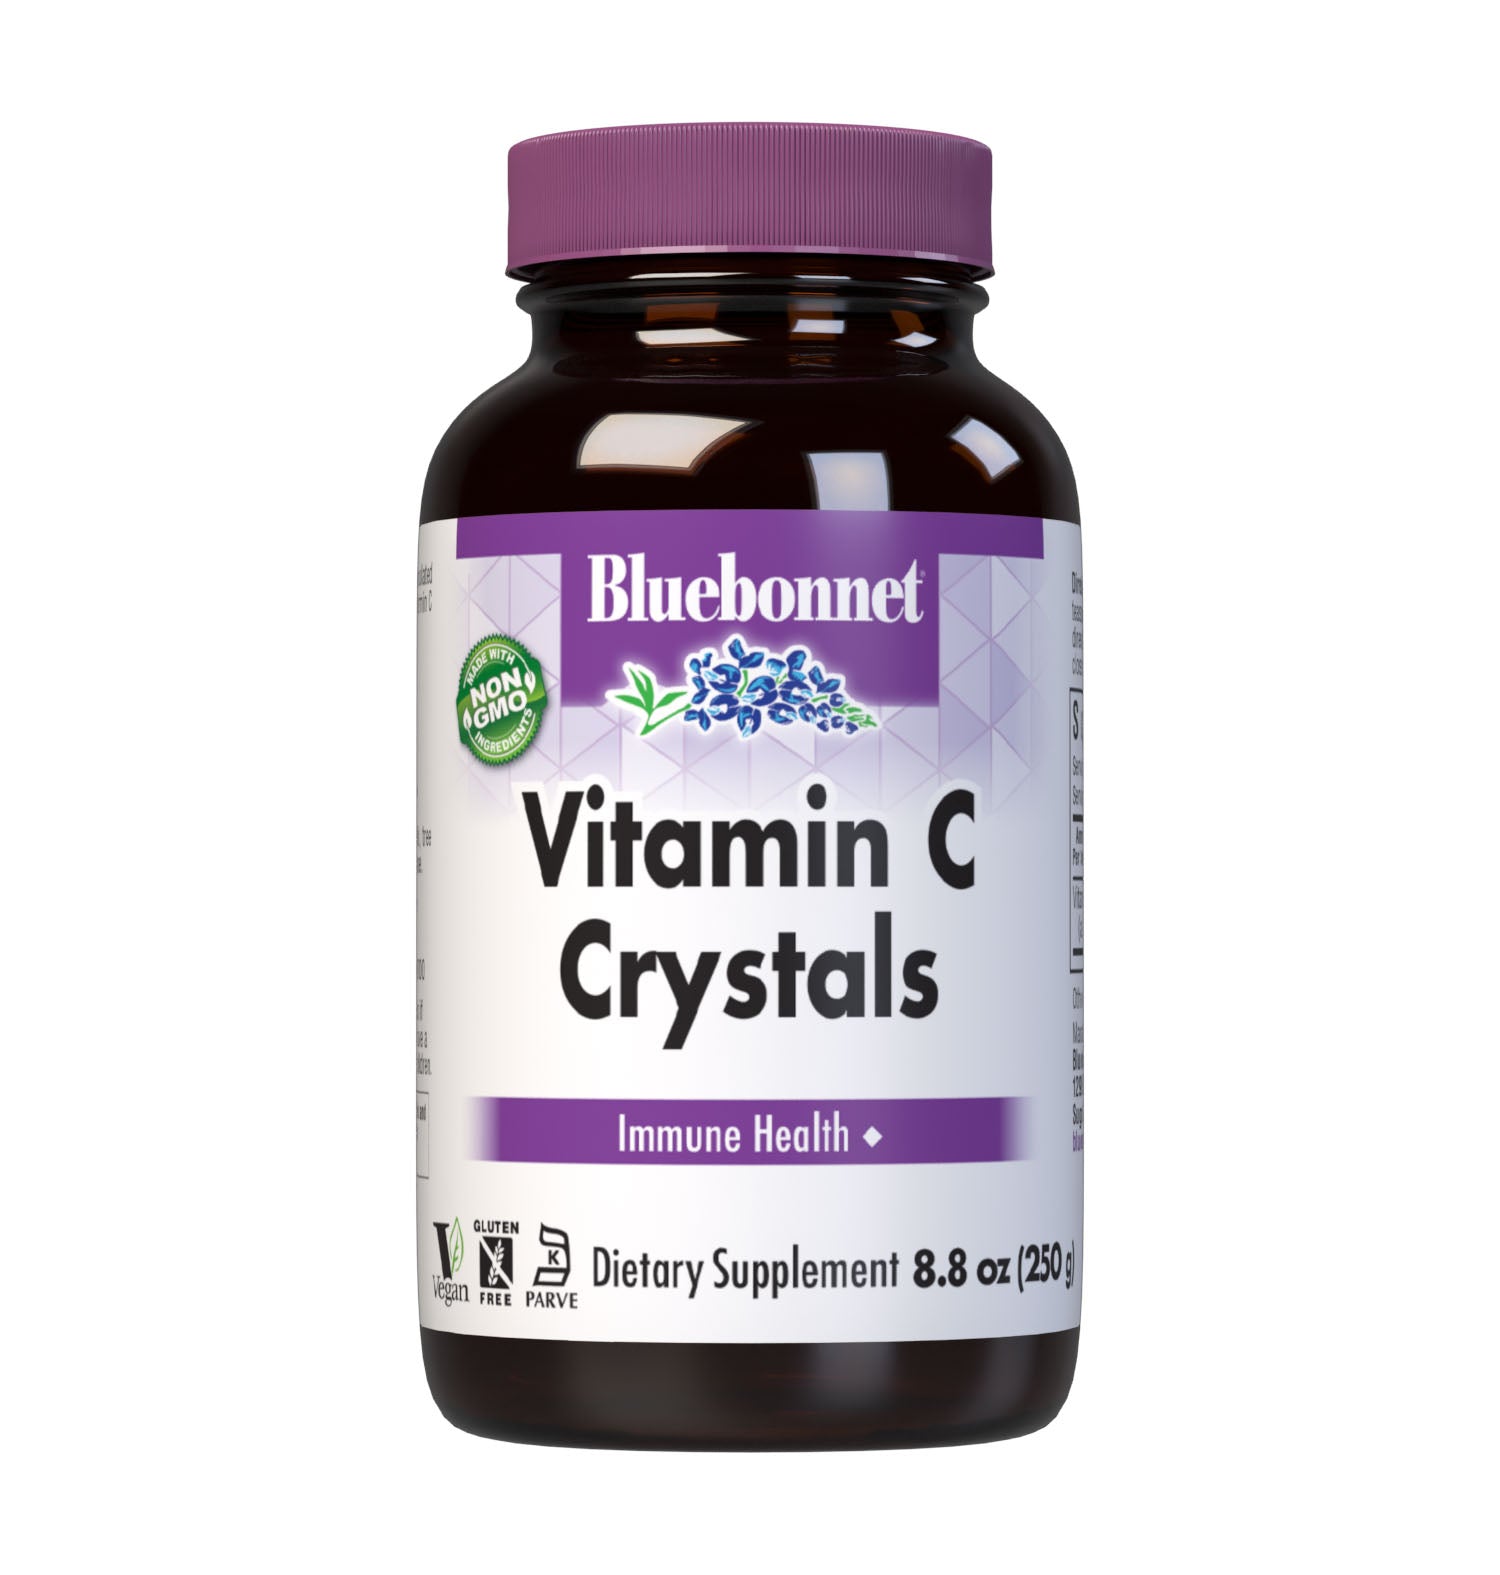 Bluebonnet’s Vitamin C Crystals are formulated with identity preserved (IP) L-ascorbic acid in its crystalline form to help support immune function. There are no excipients present. #size_8.8oz